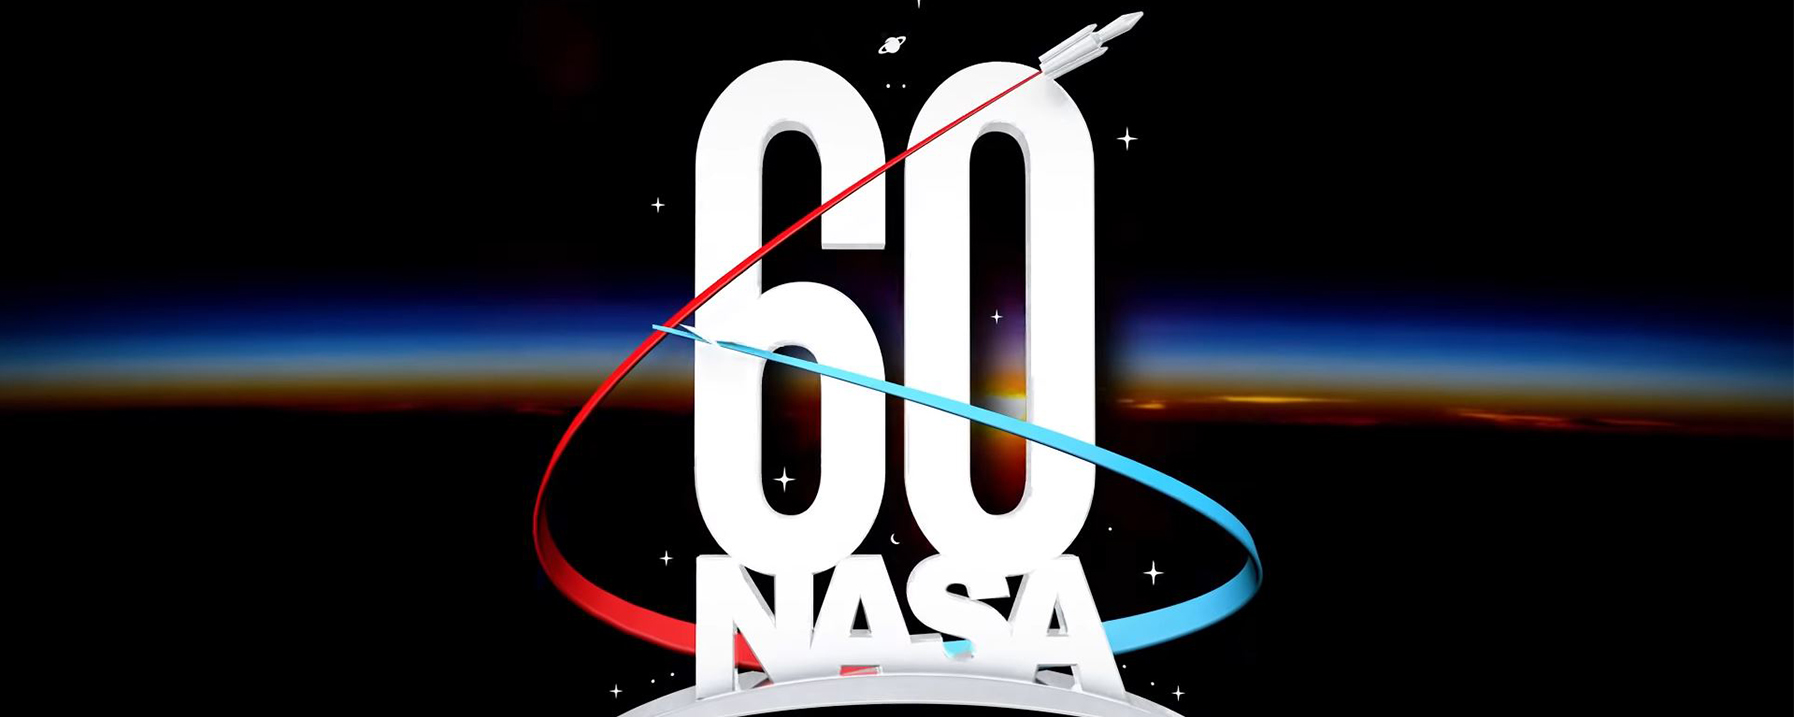 In Case You Missed It: A Weekly Summary of Top Content from NASA’s Marshall Space Flight Center